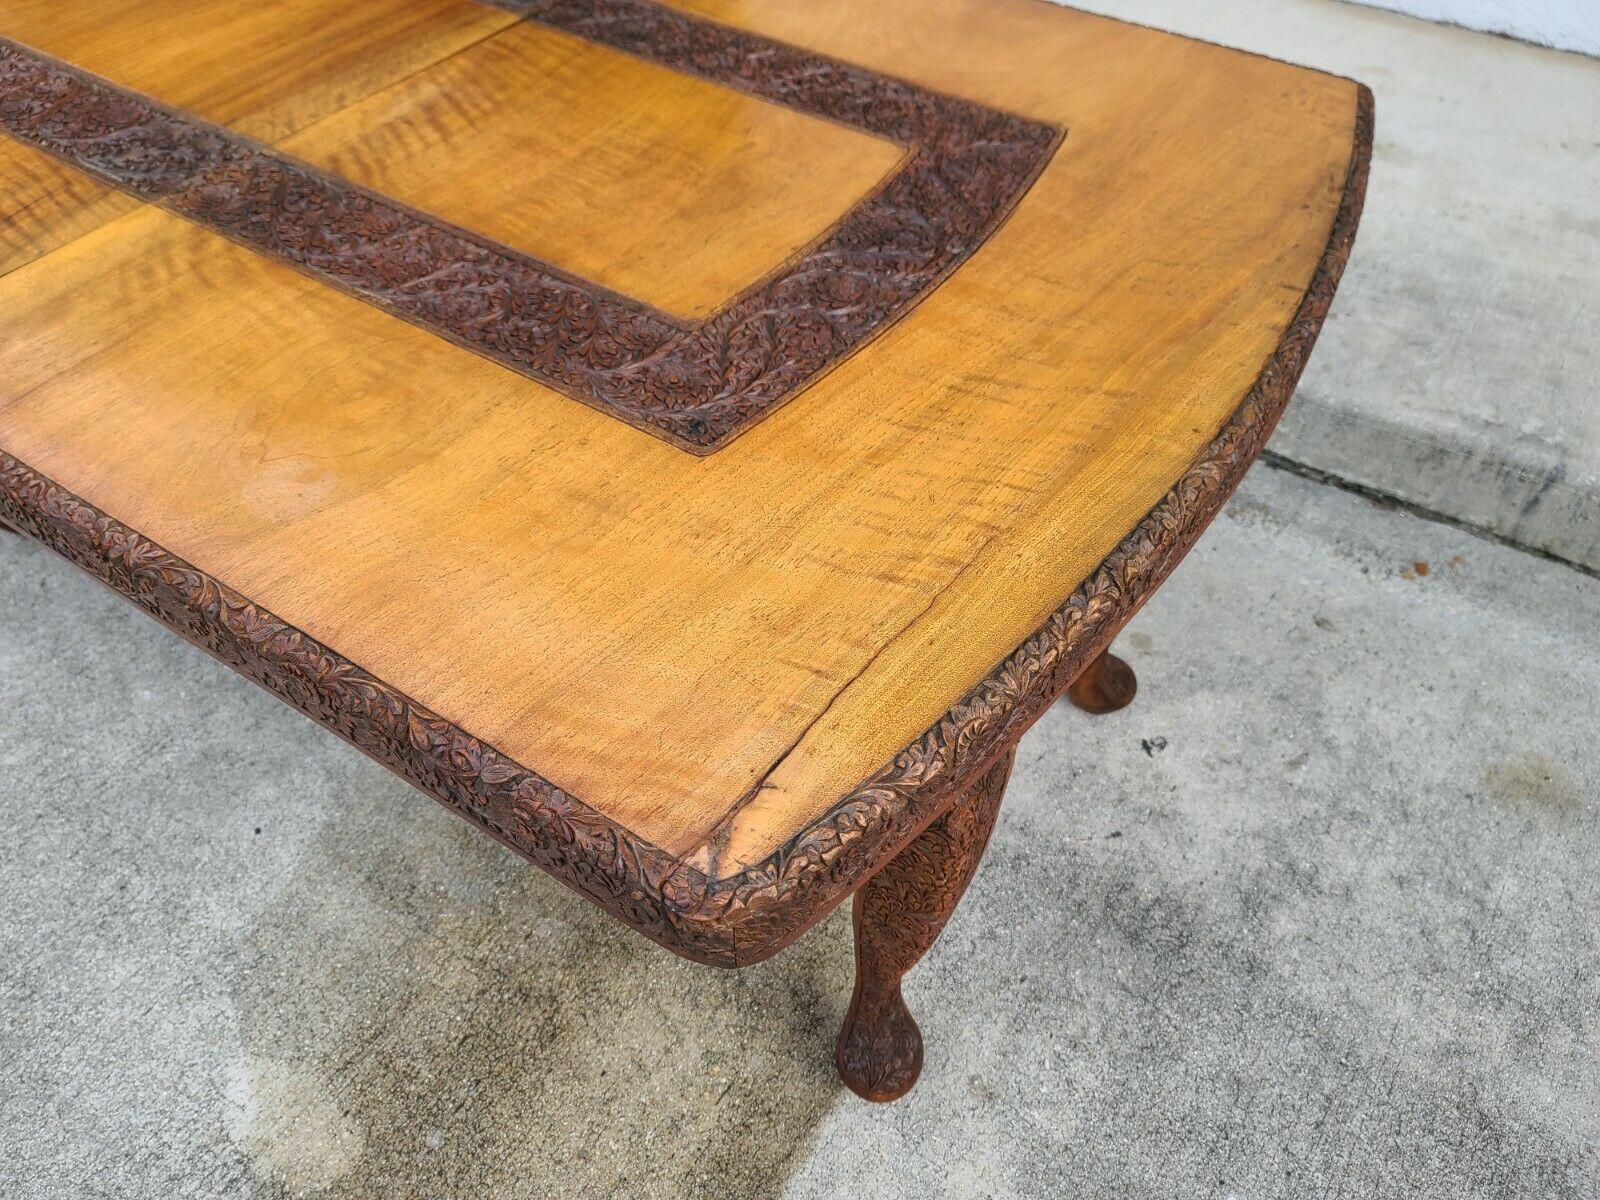 Antique c 1900's Hand Carved Solid Wood French Dining Table In Good Condition For Sale In Lake Worth, FL